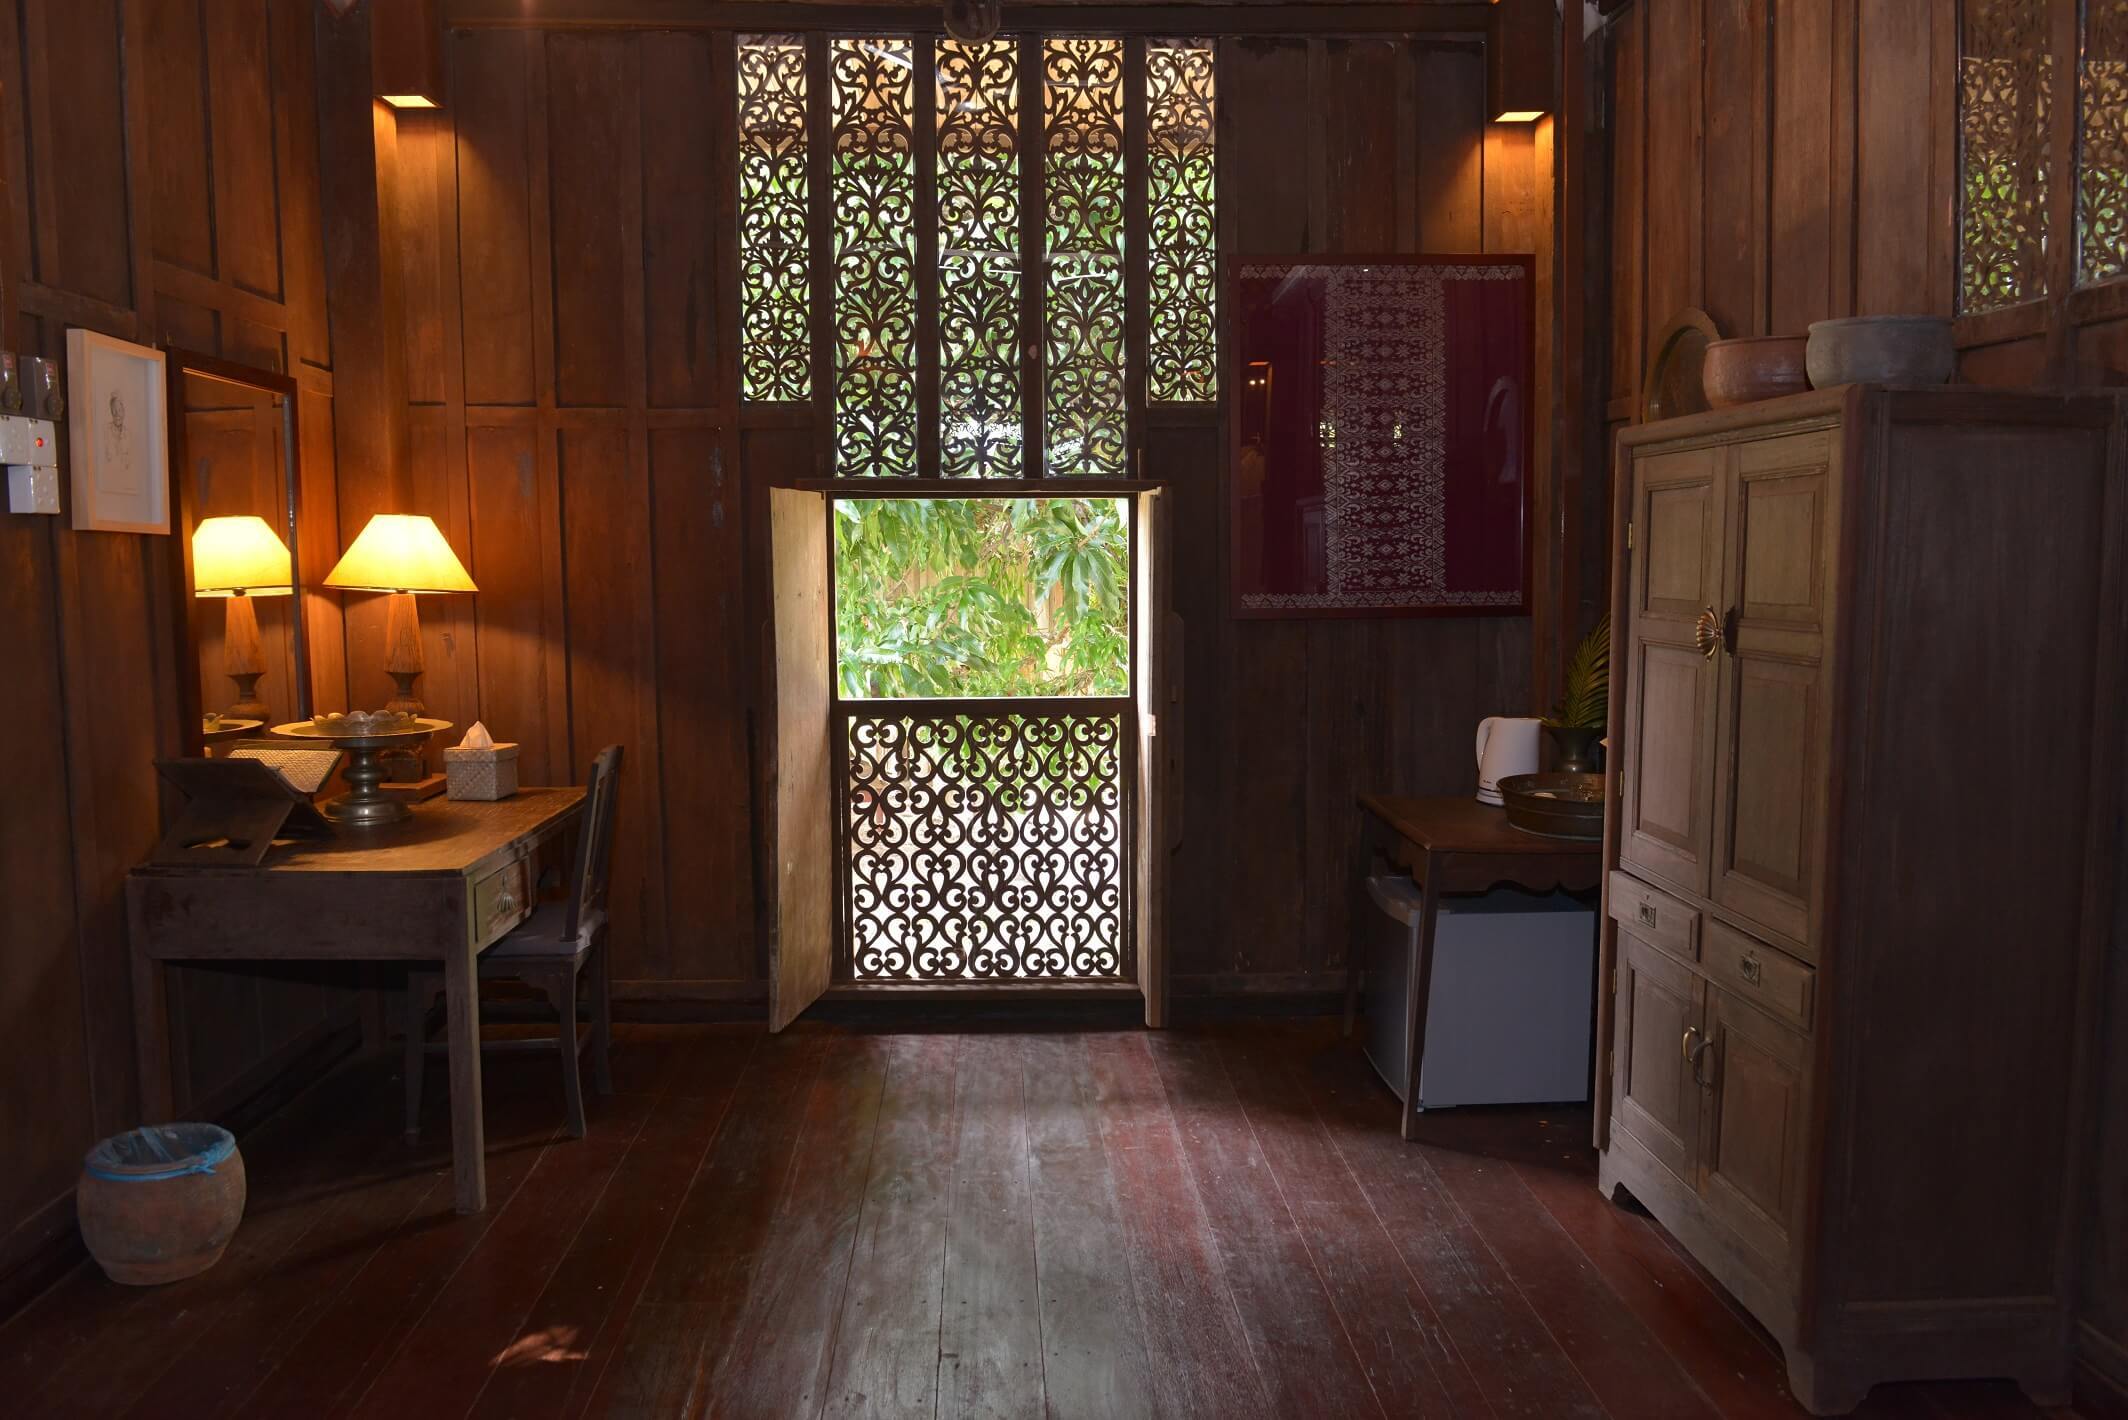 Amid a wood-panelled interior polished to a lustrous sheen, a window with delicate carvings takes centre stage. Photo courtesy of Terrapuri Heritage Village 